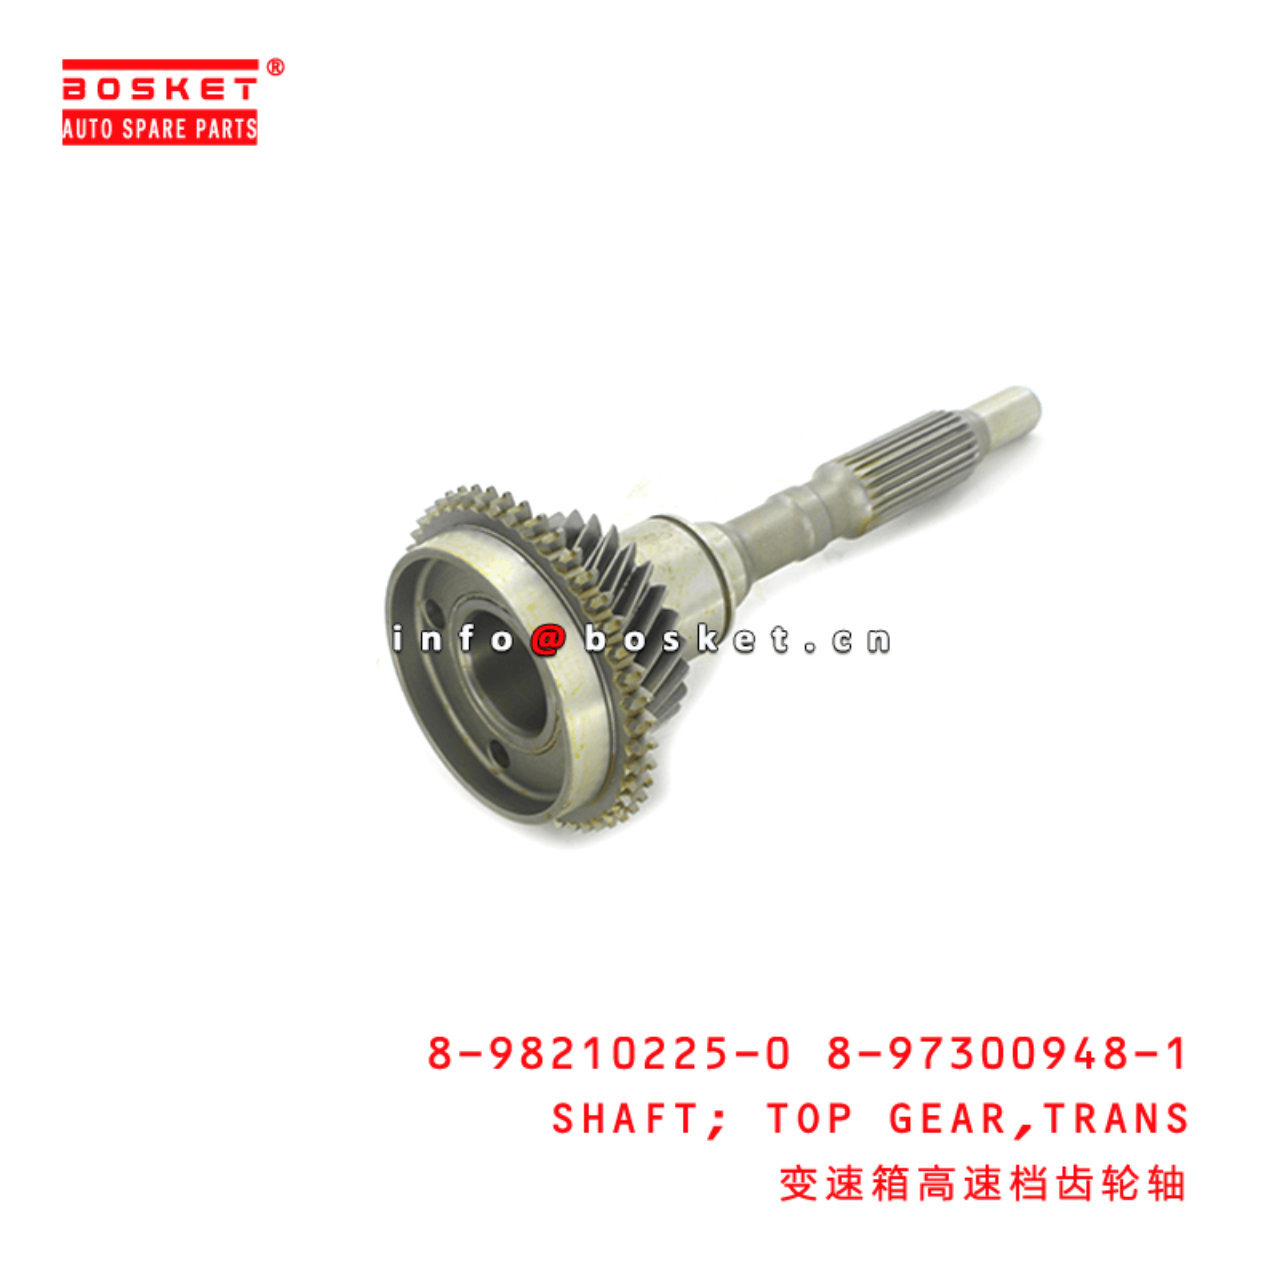 8-98210225-0 8-97300948-1 Transmission Top Gear Shaft 8982102250 8973009481 Suitable for ISUZU TFR